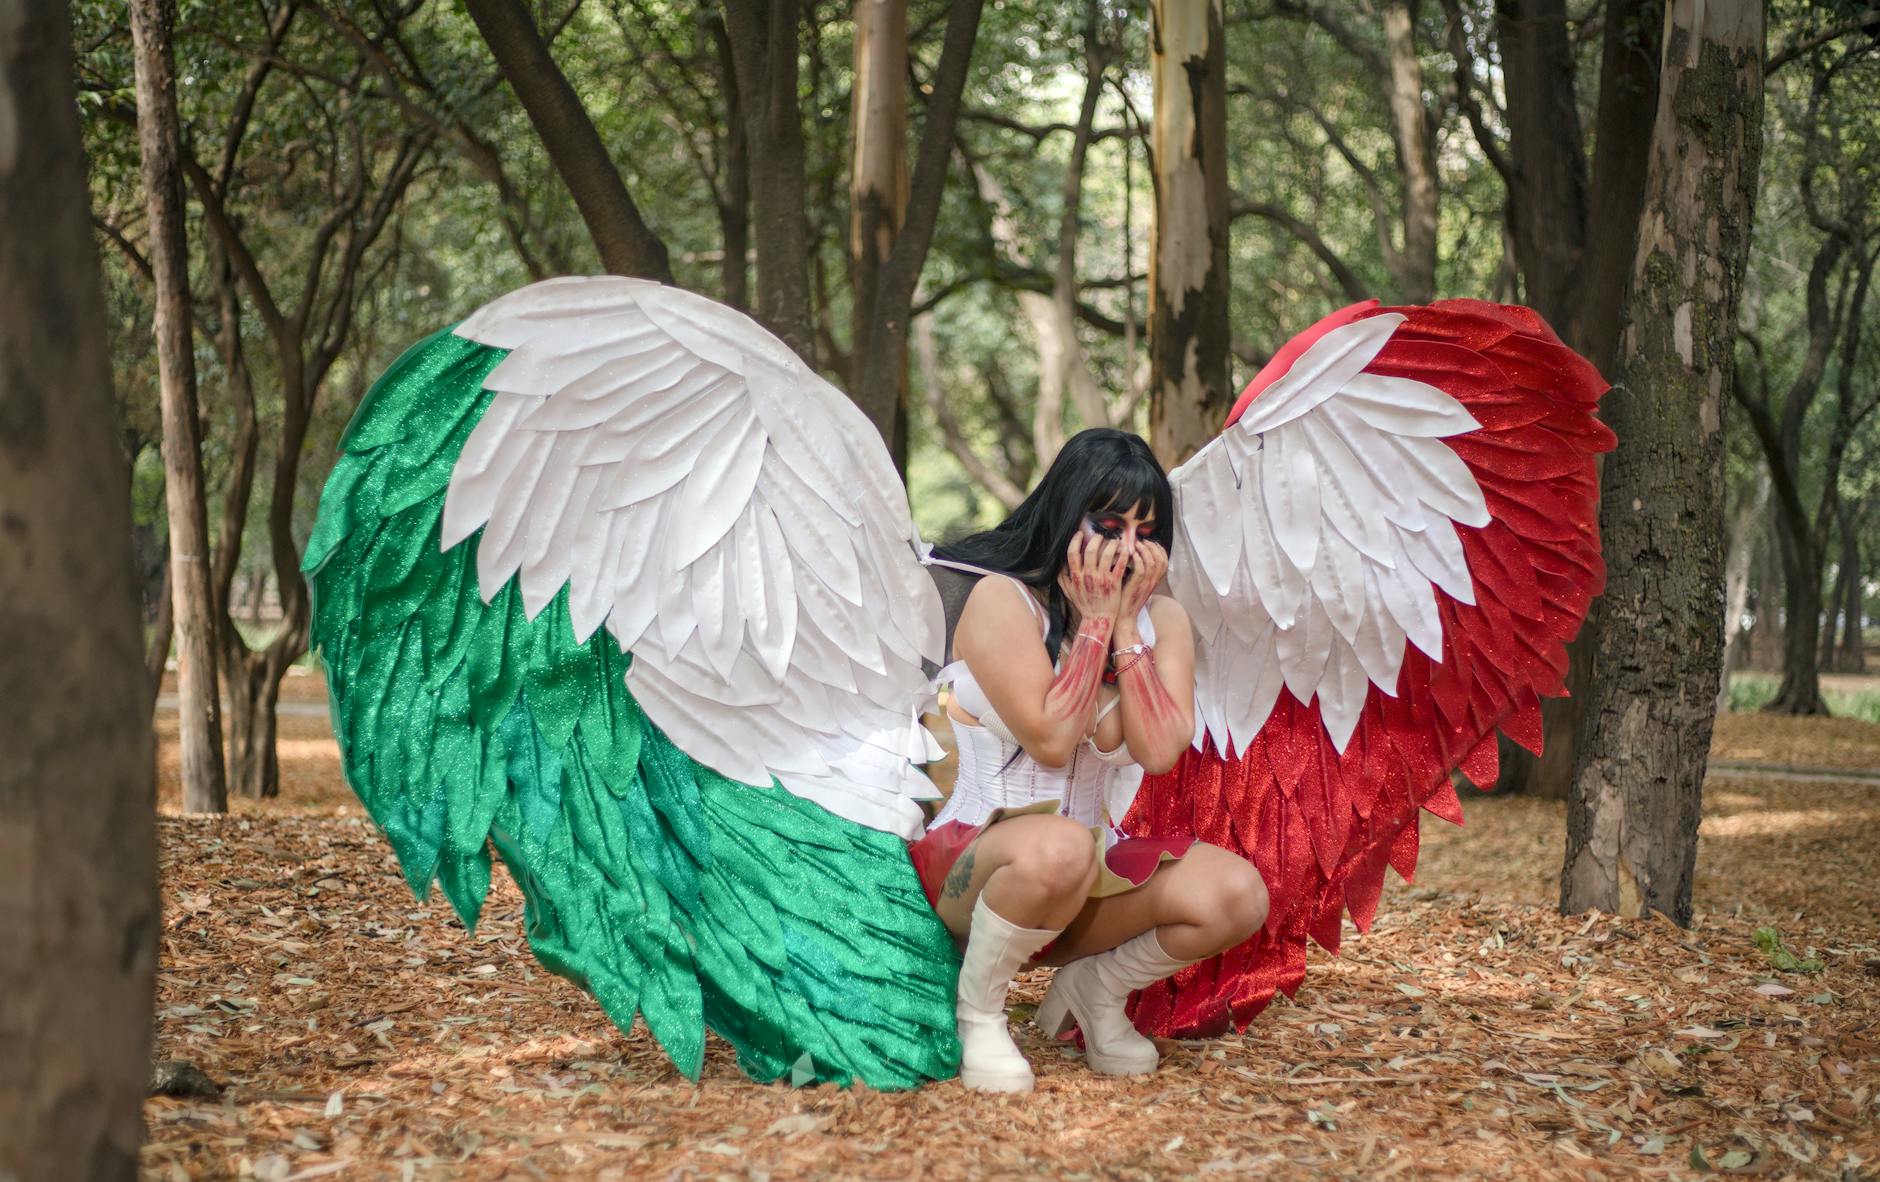 a woman wearing a costume with tricolor angel wings